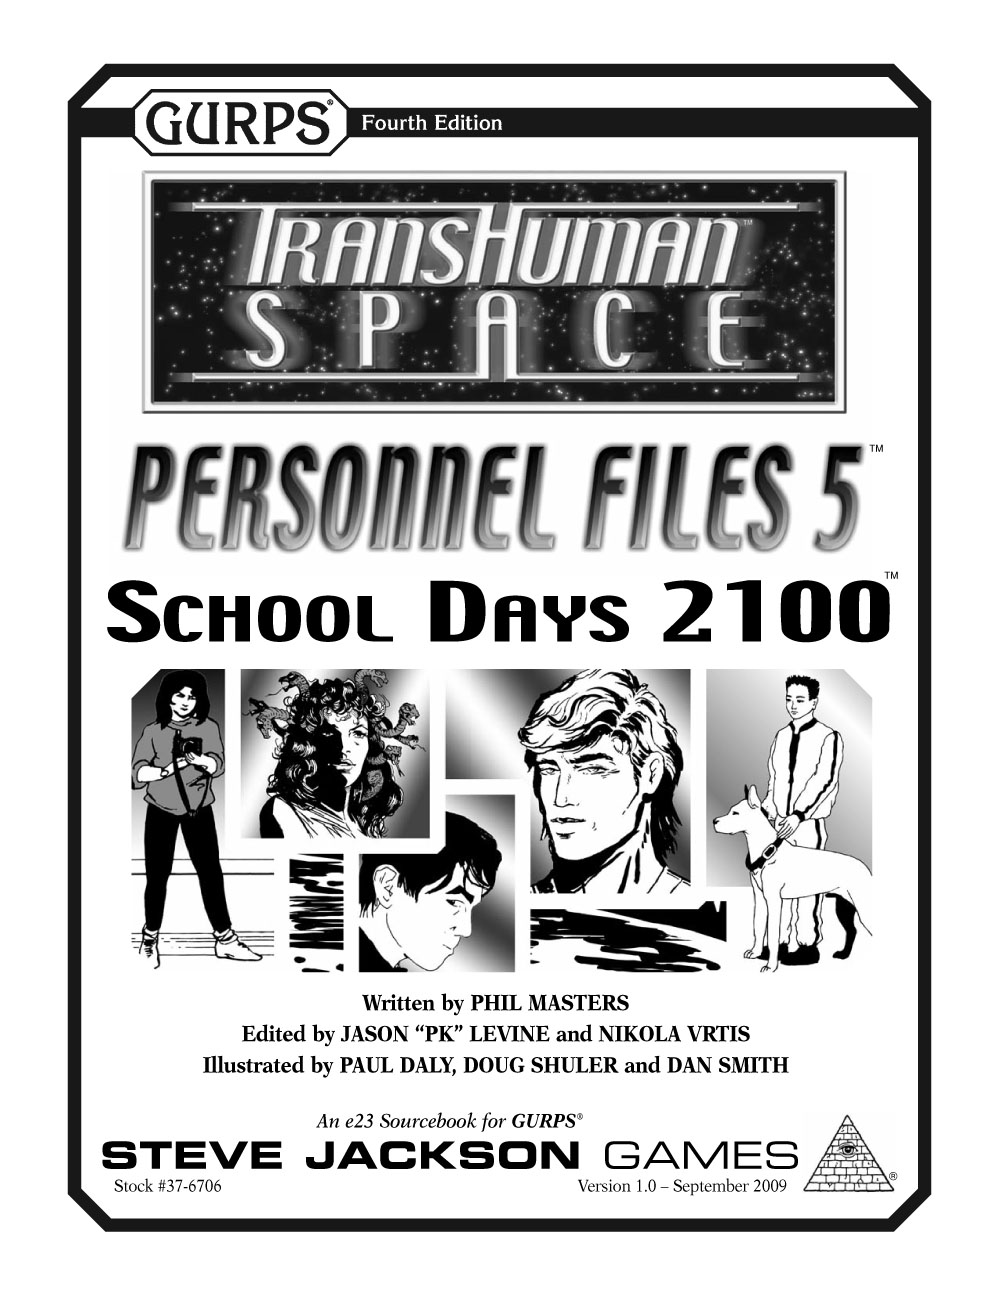 GURPS Transhuman Space: Personnel Files 5 � School Days 2100